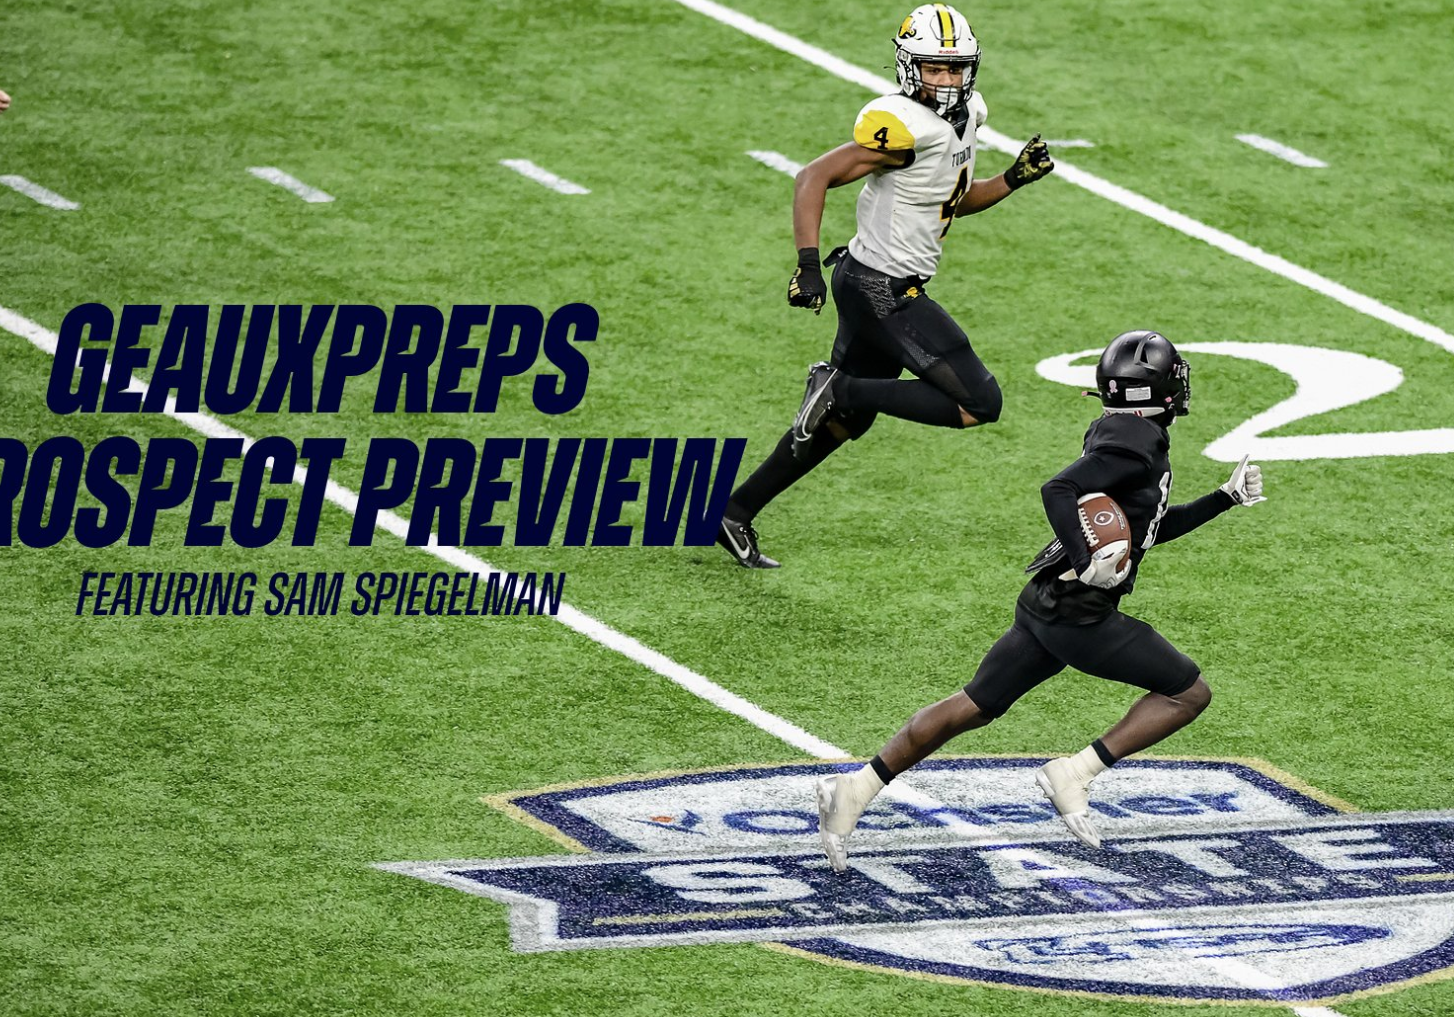 FINAL PROSPECT PREVIEW